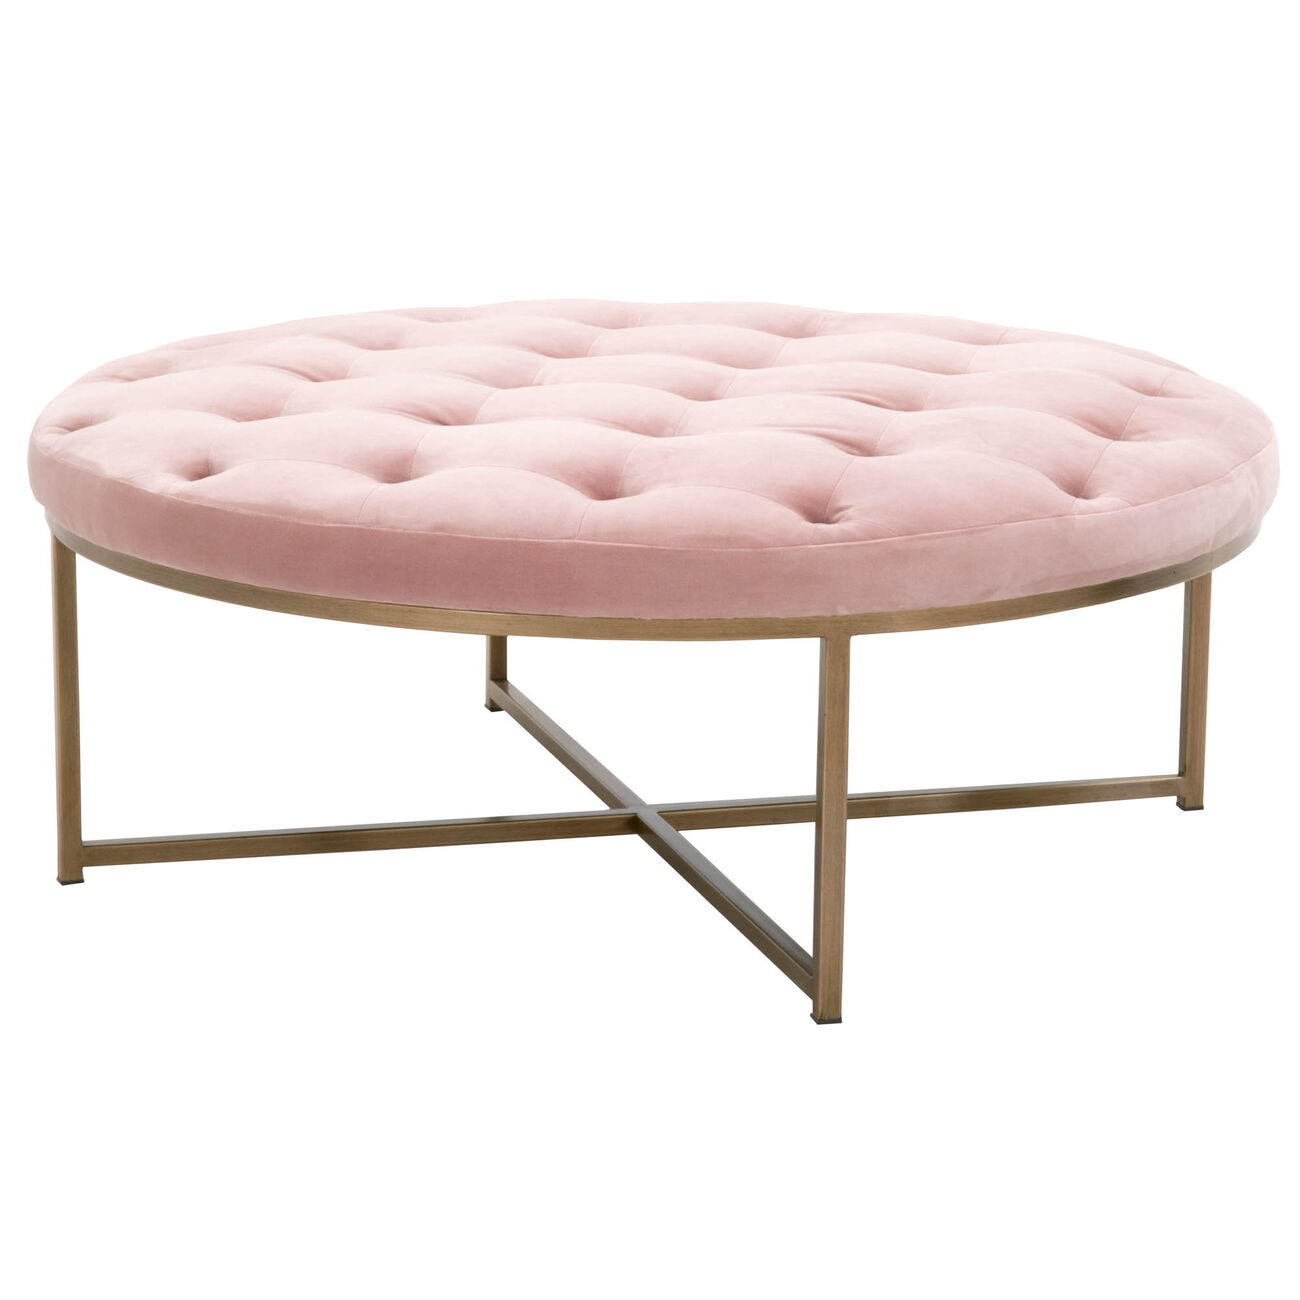 Button Tufted Fabric Upholstered Coffee Table with Metal Base, Pink and Brass